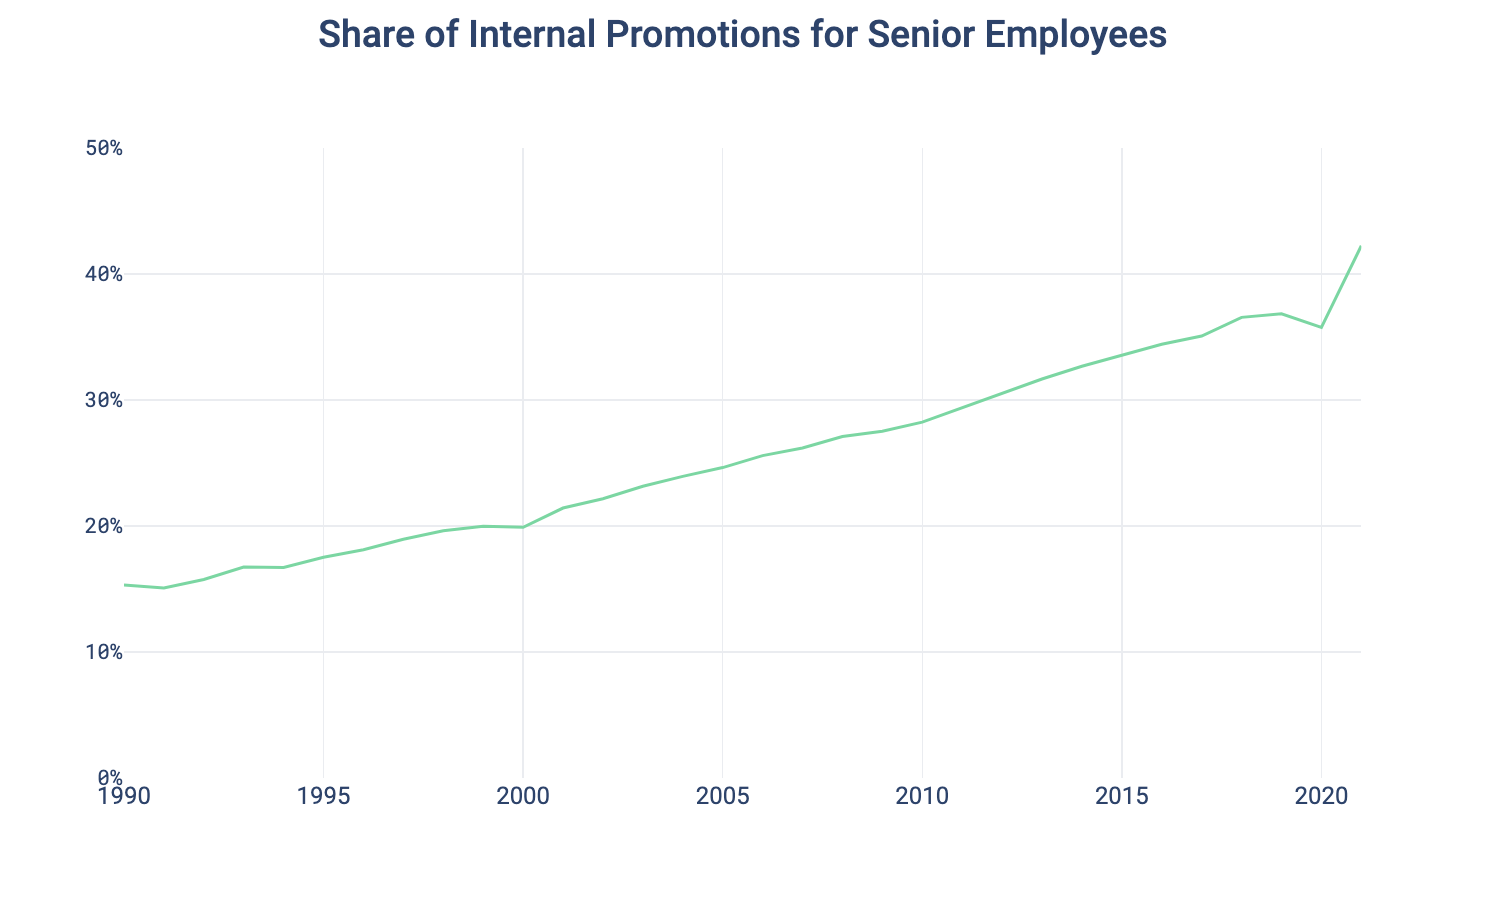 Share of Internal Promotions for Senior Employees